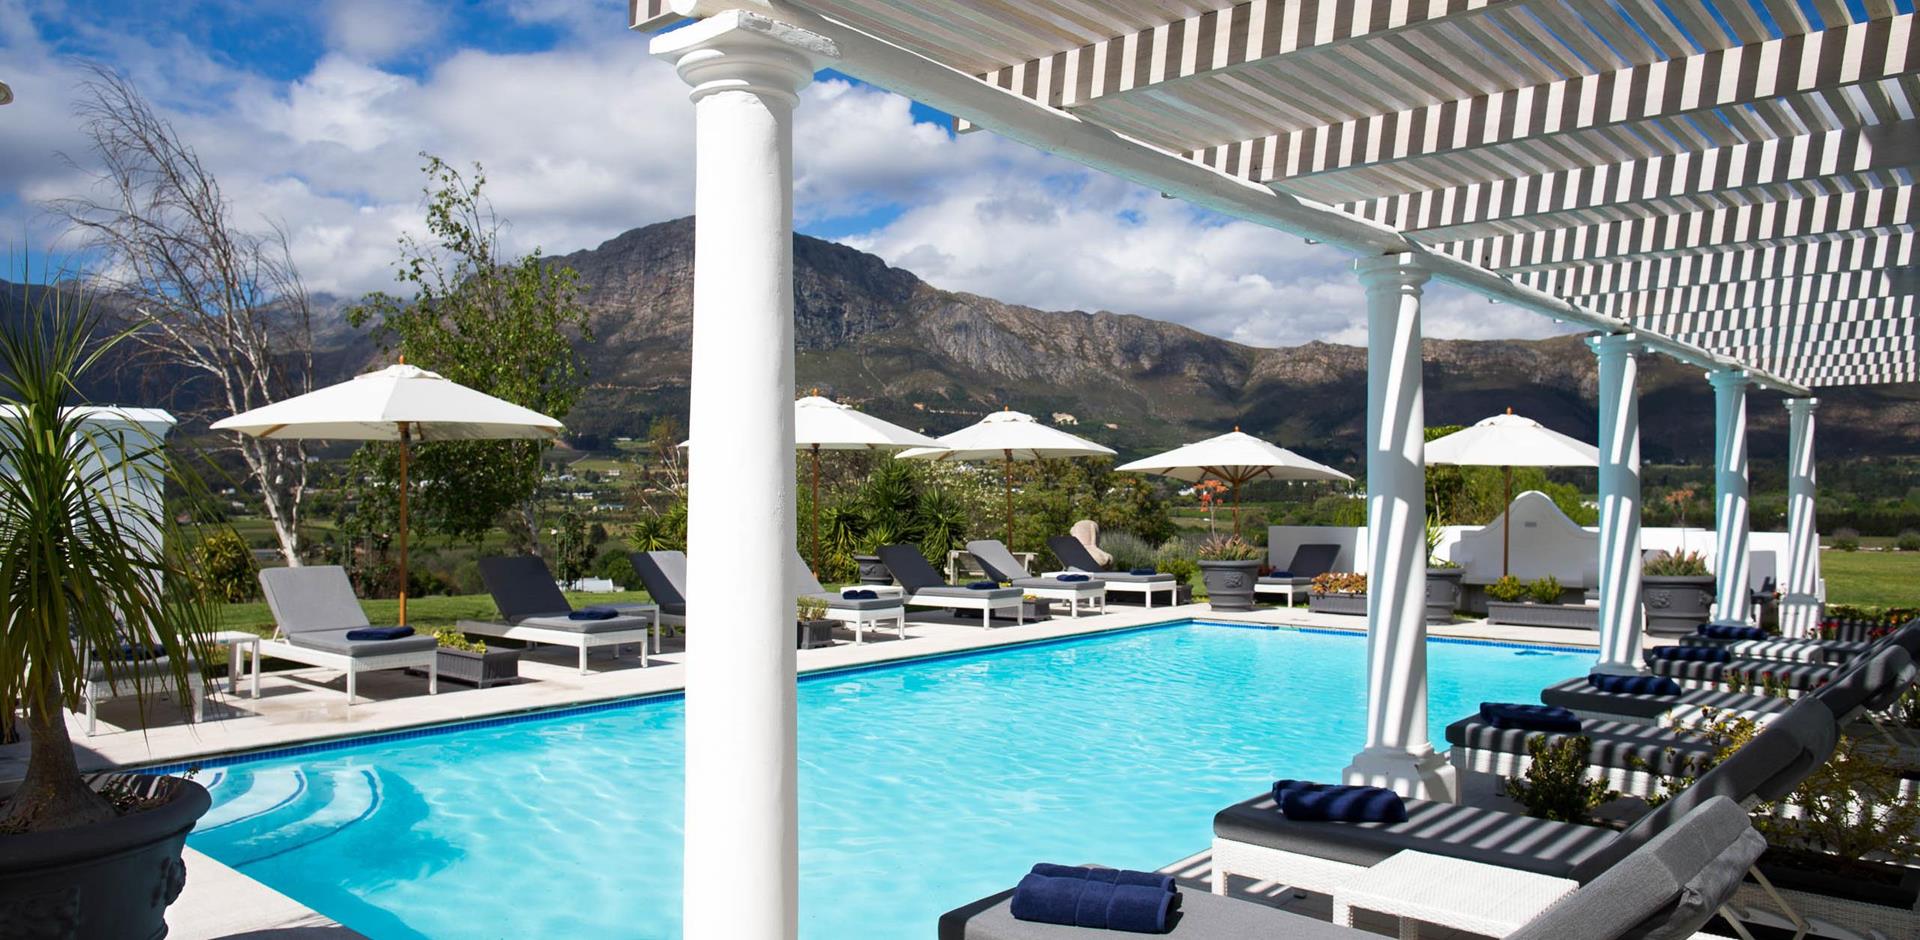 Pool, Mont Rochelle, South Africa, A&K